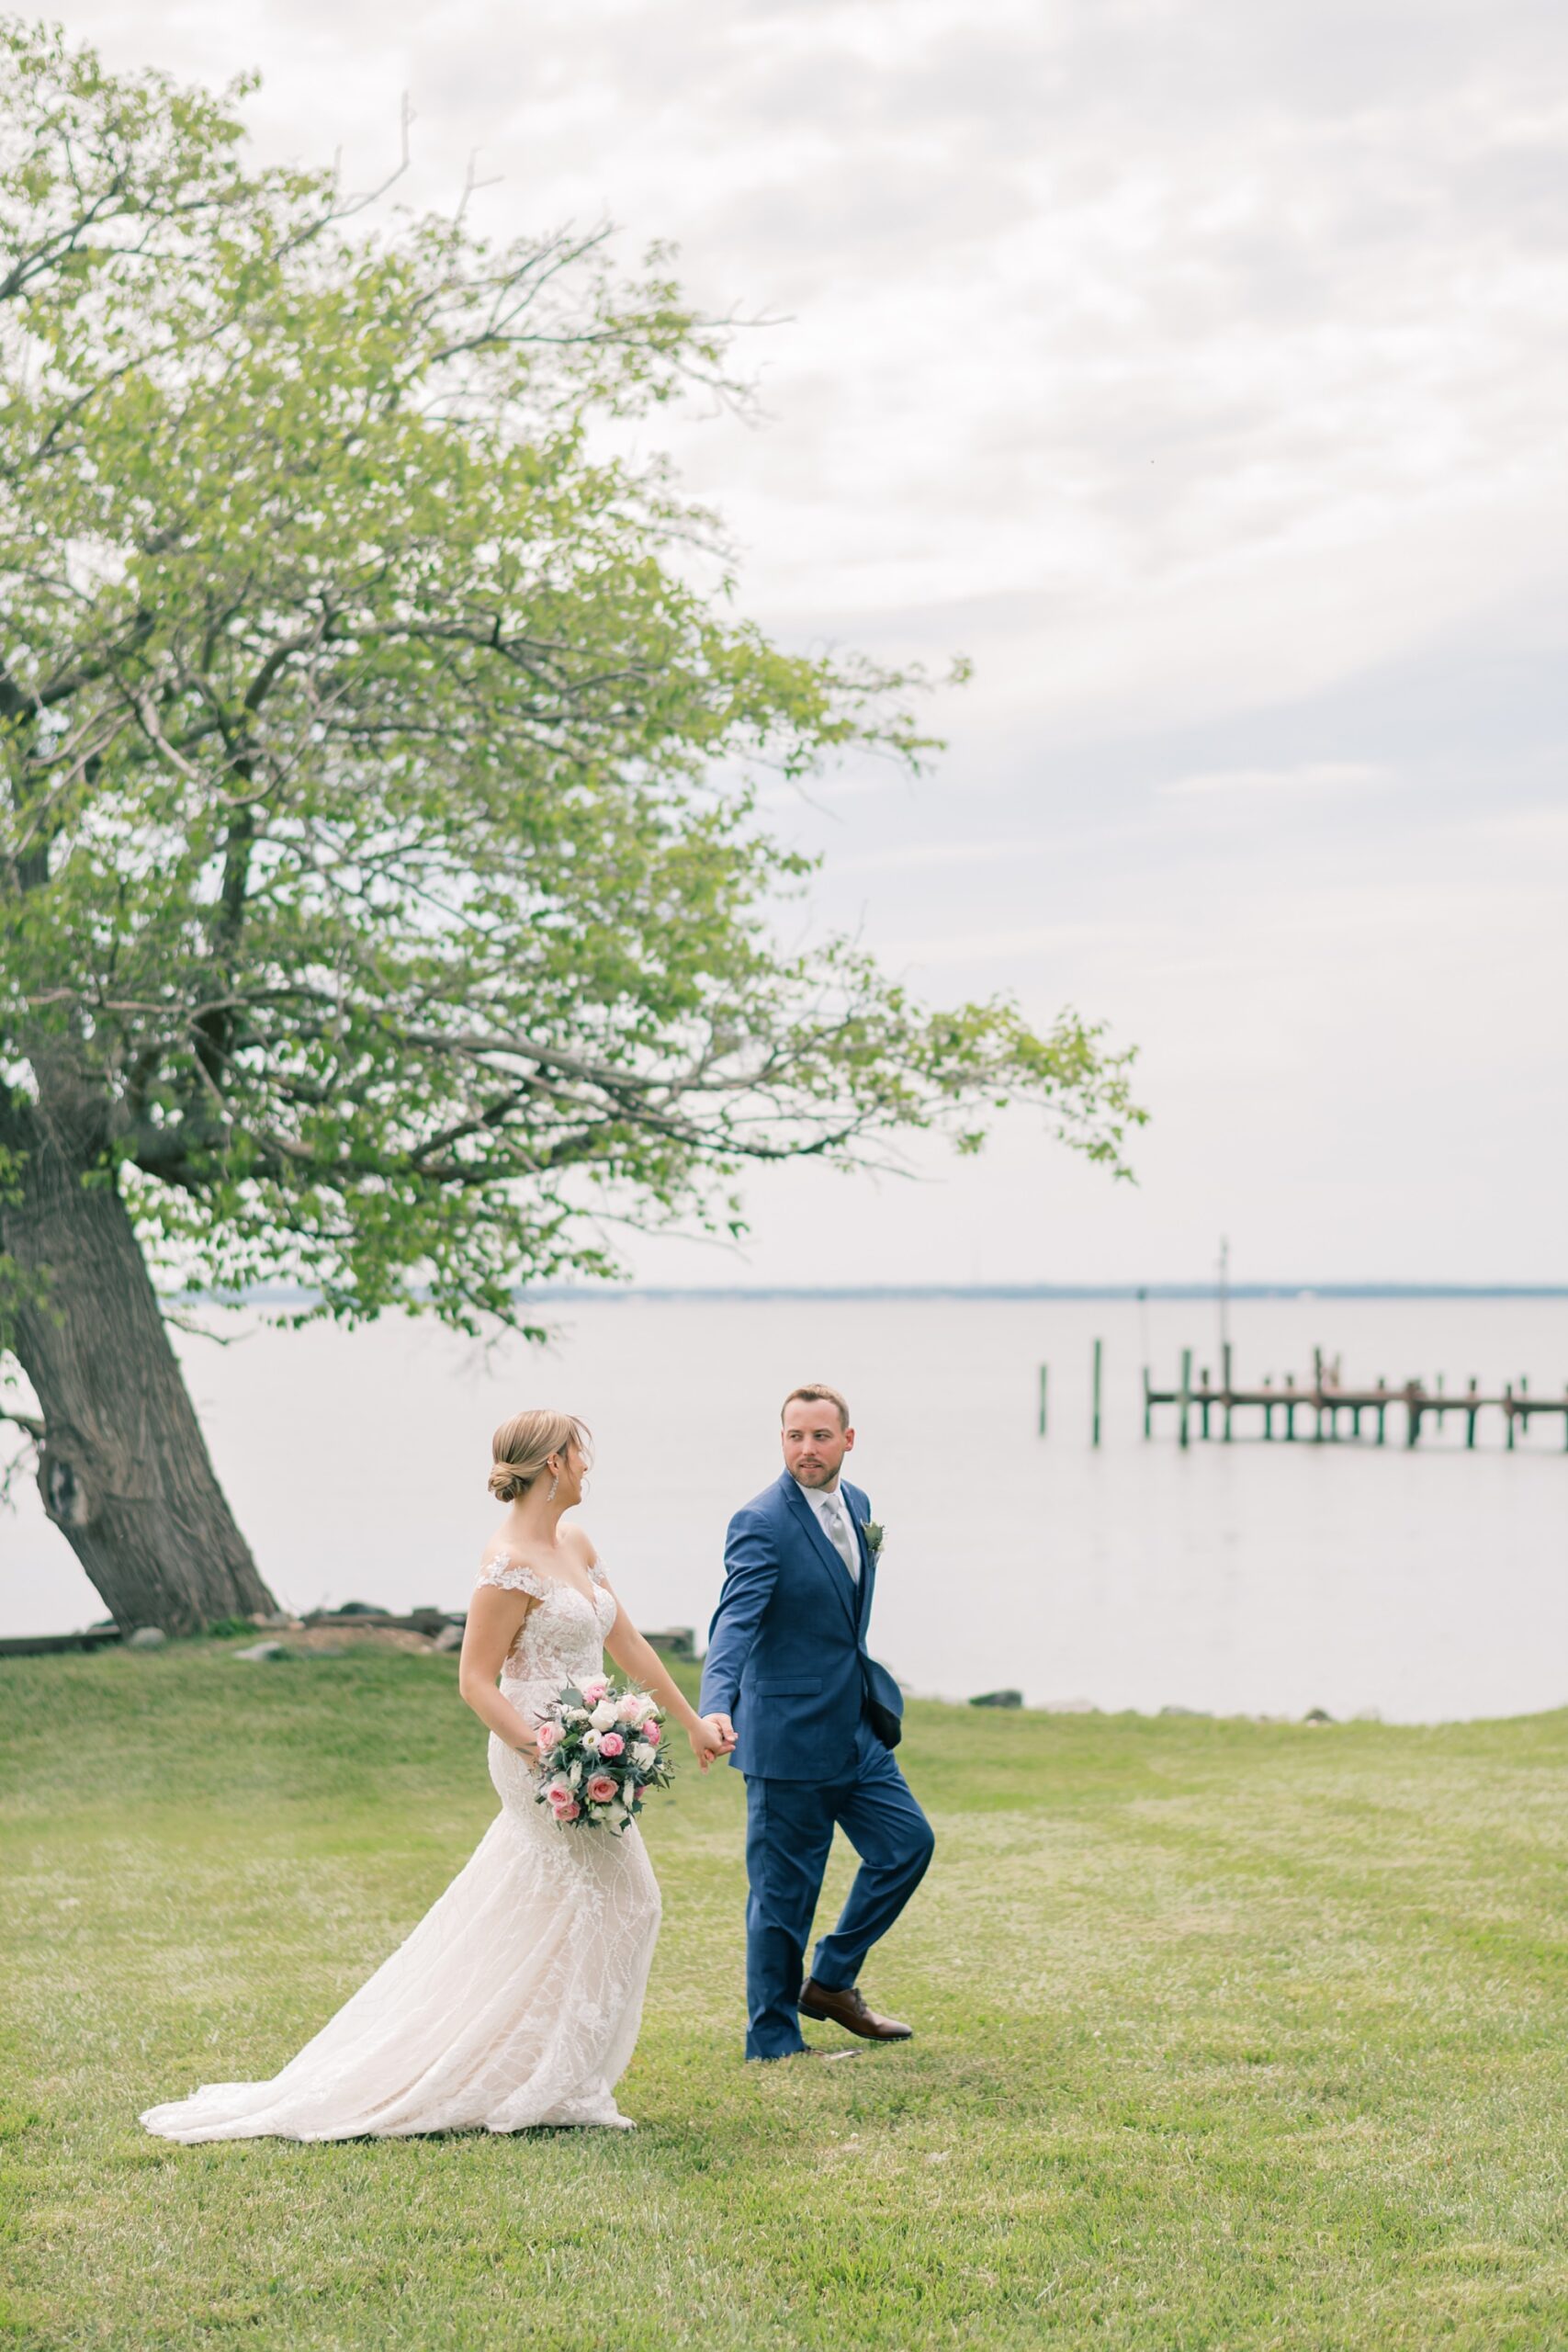 newlyweds hold hands walking across lawn with water behind them at the Pavilion at Weatherly